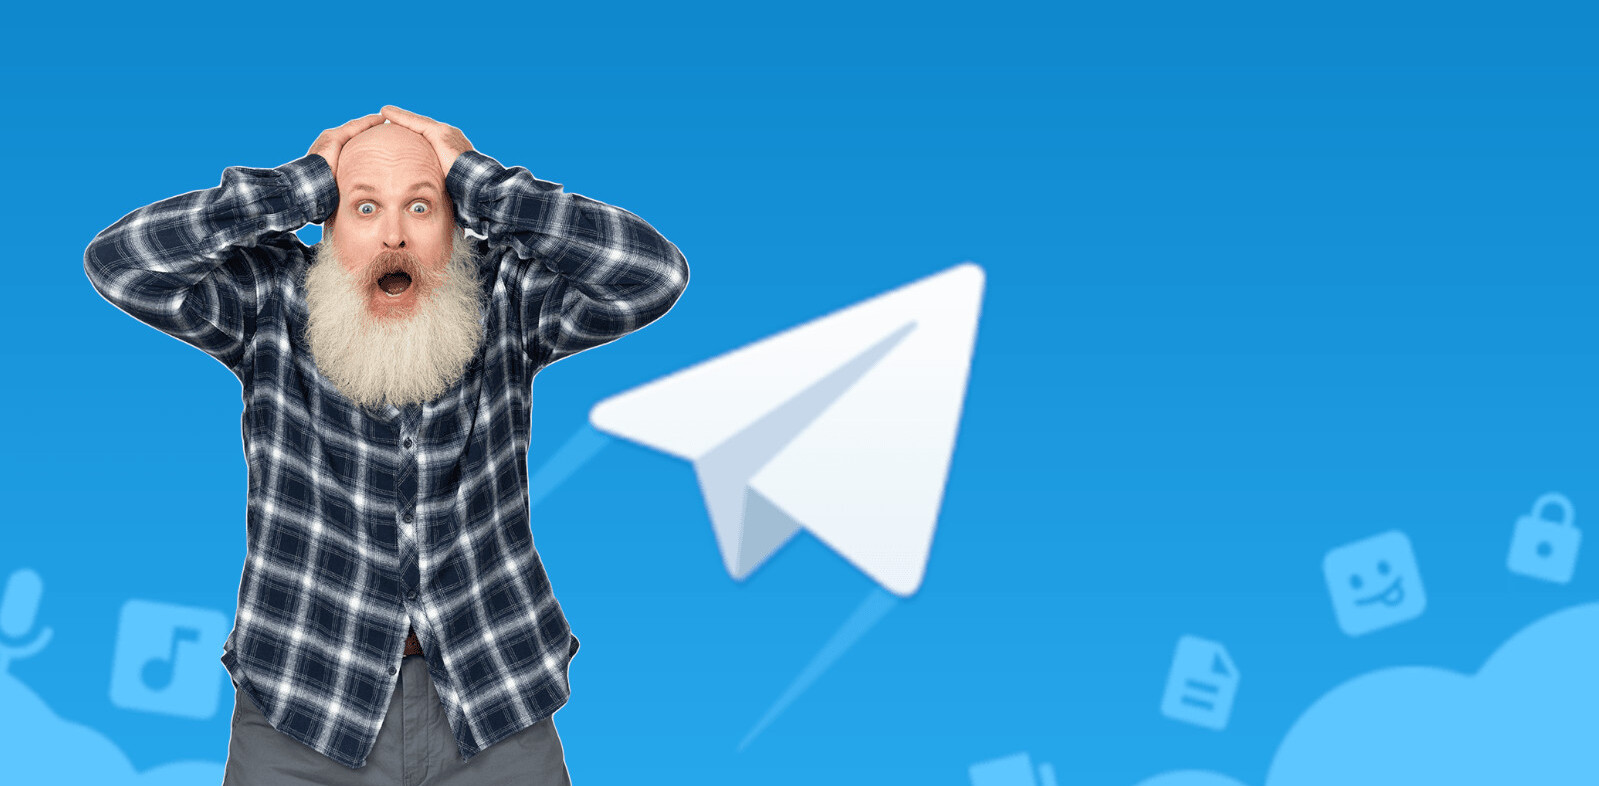 Telegram promises to finish messy launch of its ‘cryptocurrency’ Gram by October 31